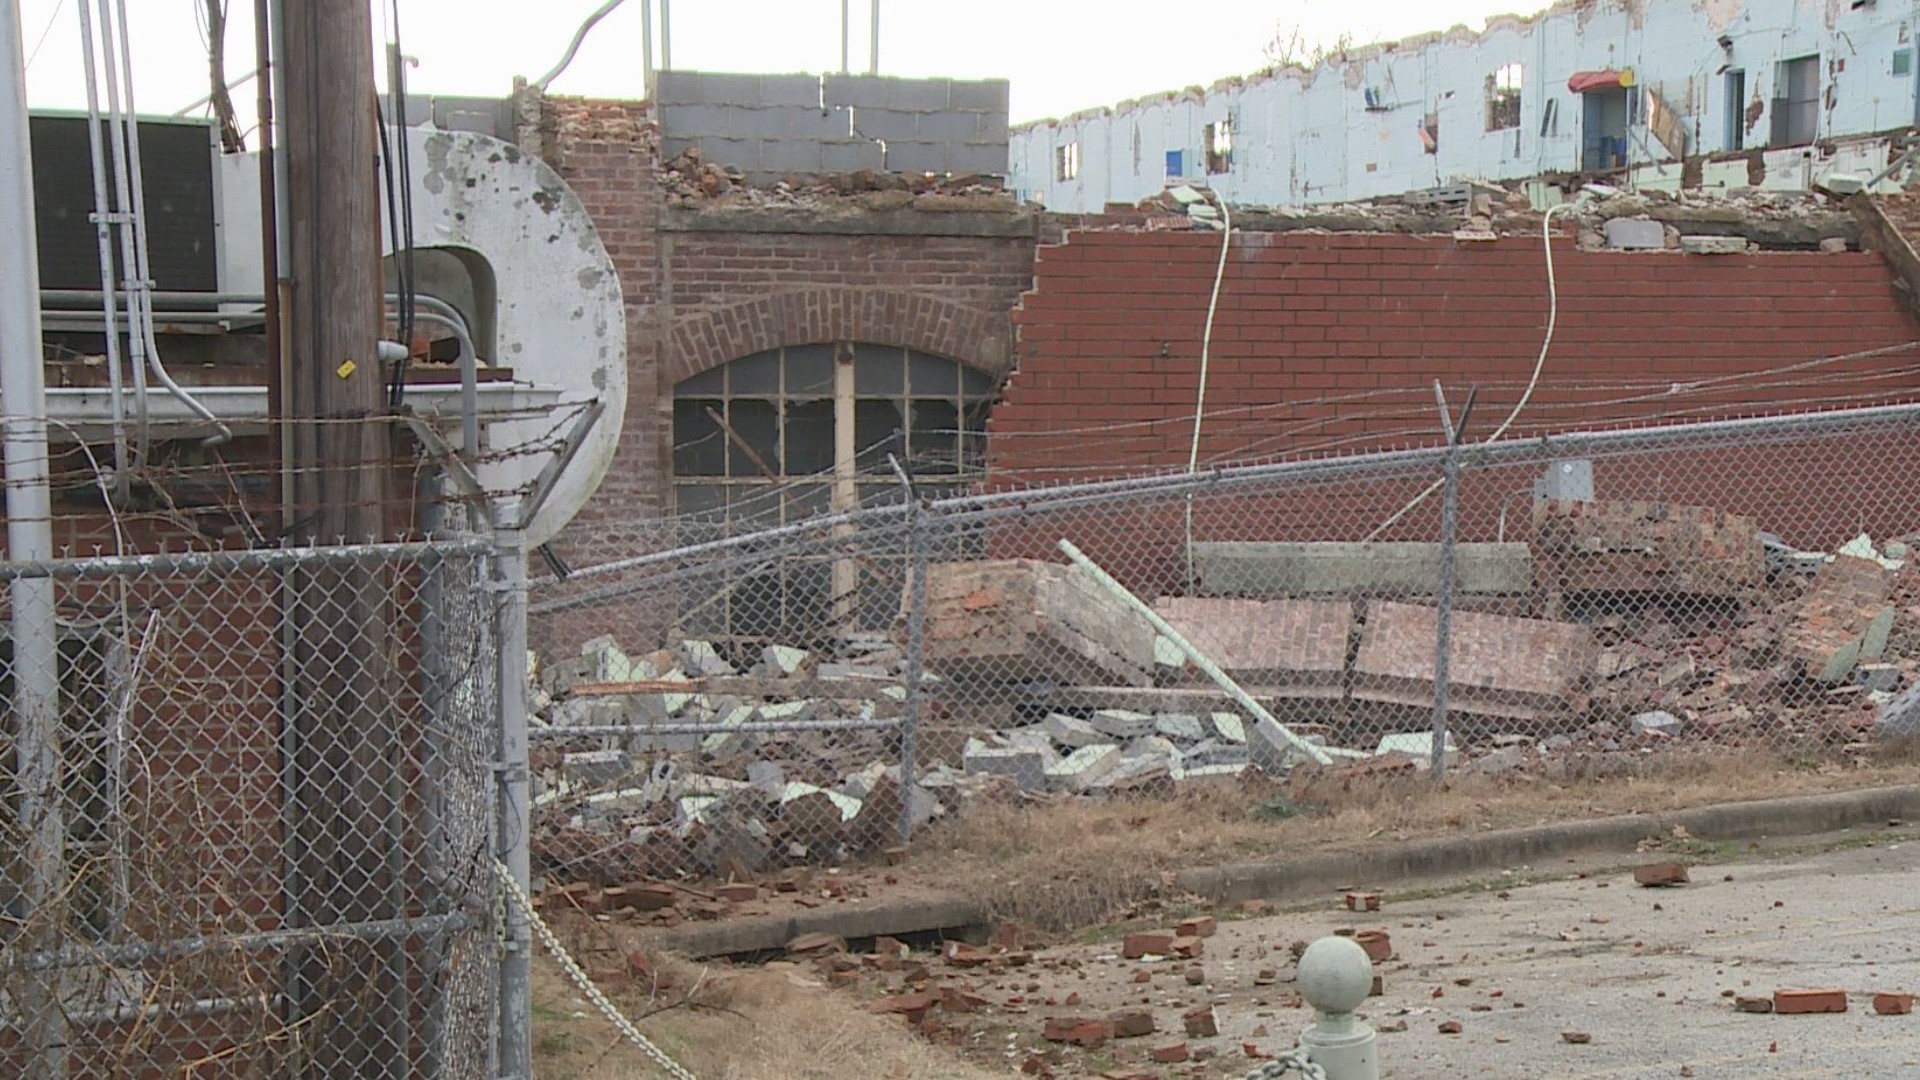 Demolition crews took down former Cone Mills White Oak Plant, which has been a part of Greensboro's denim history for 110 years. The plant shutdown in December 2017.